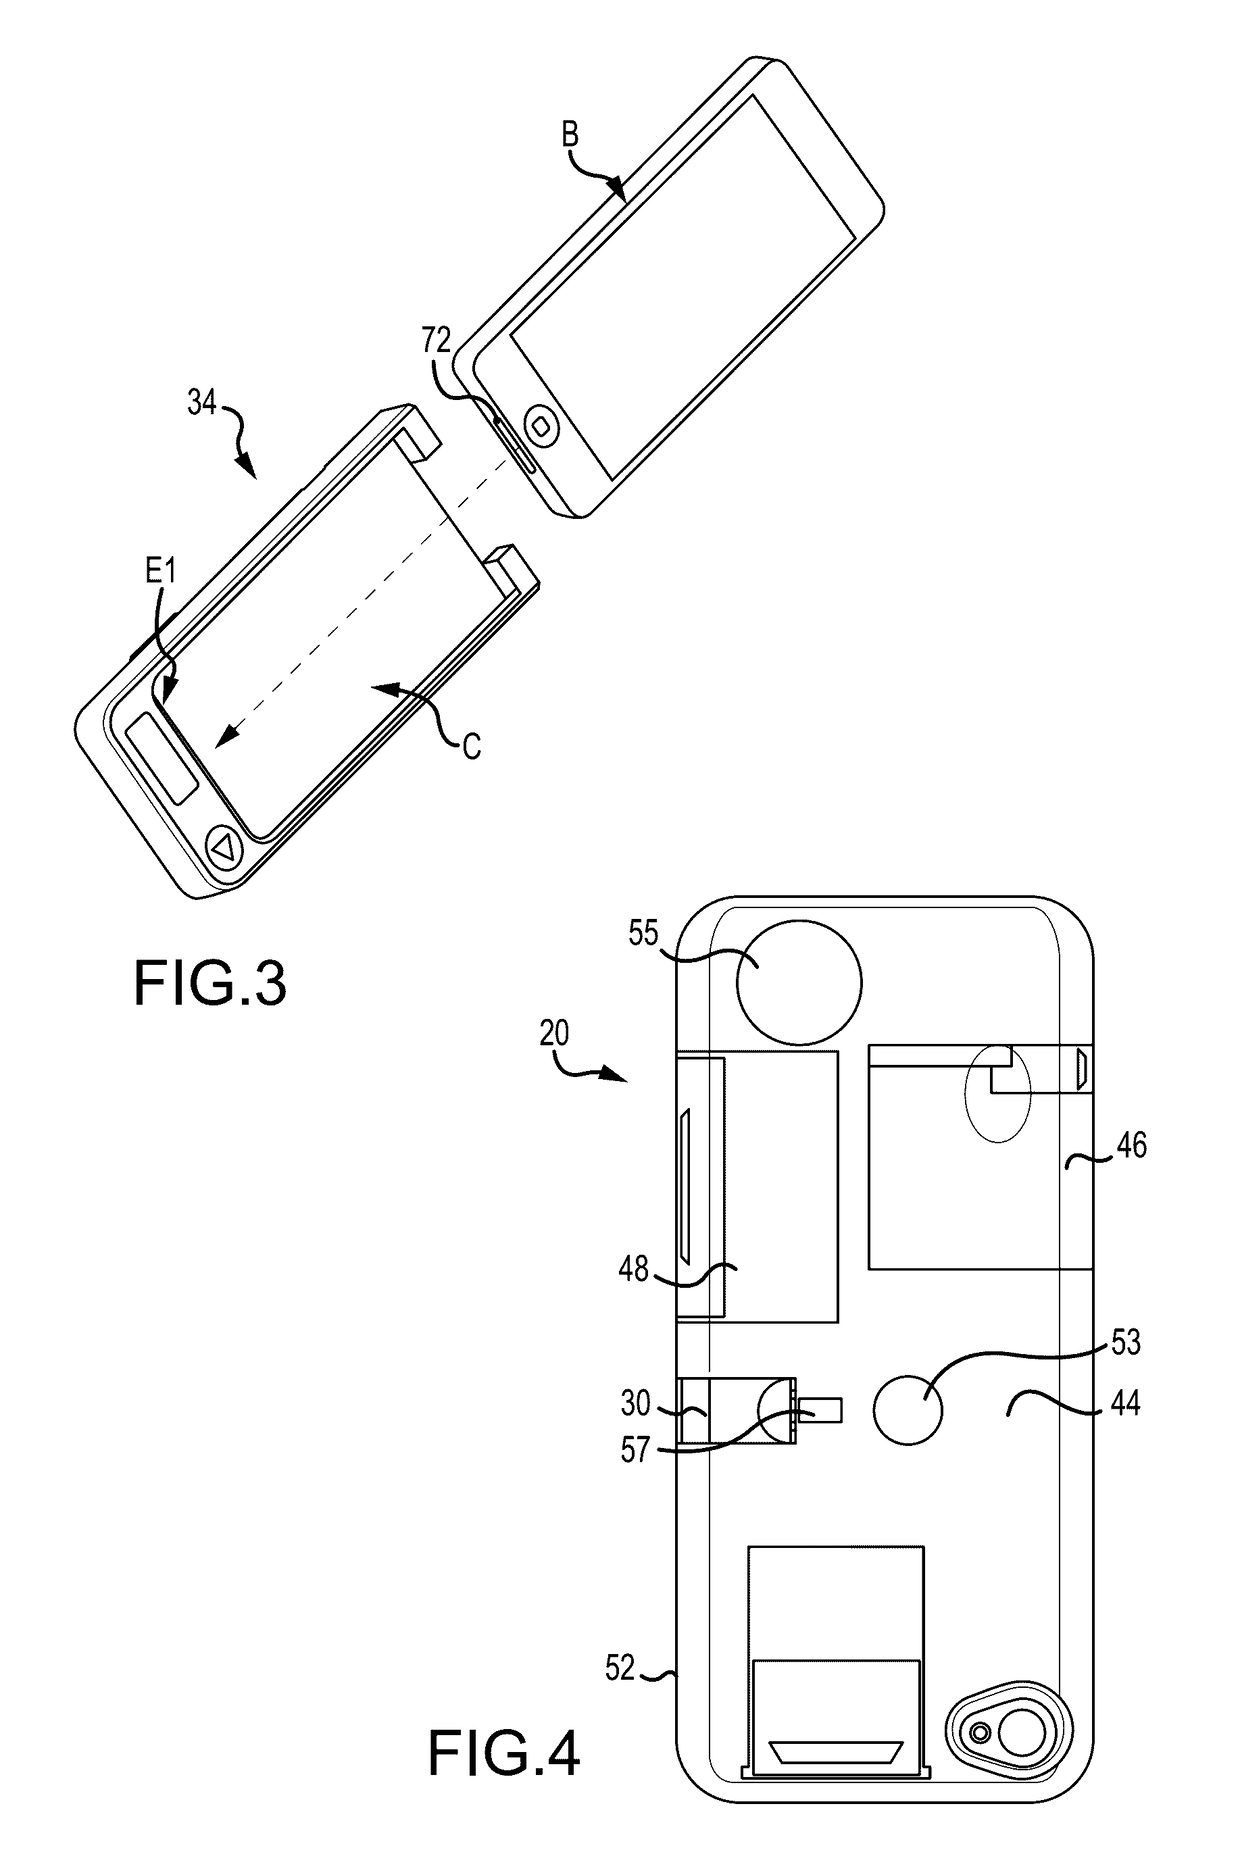 Glucose monitoring device in a protective smartphone case